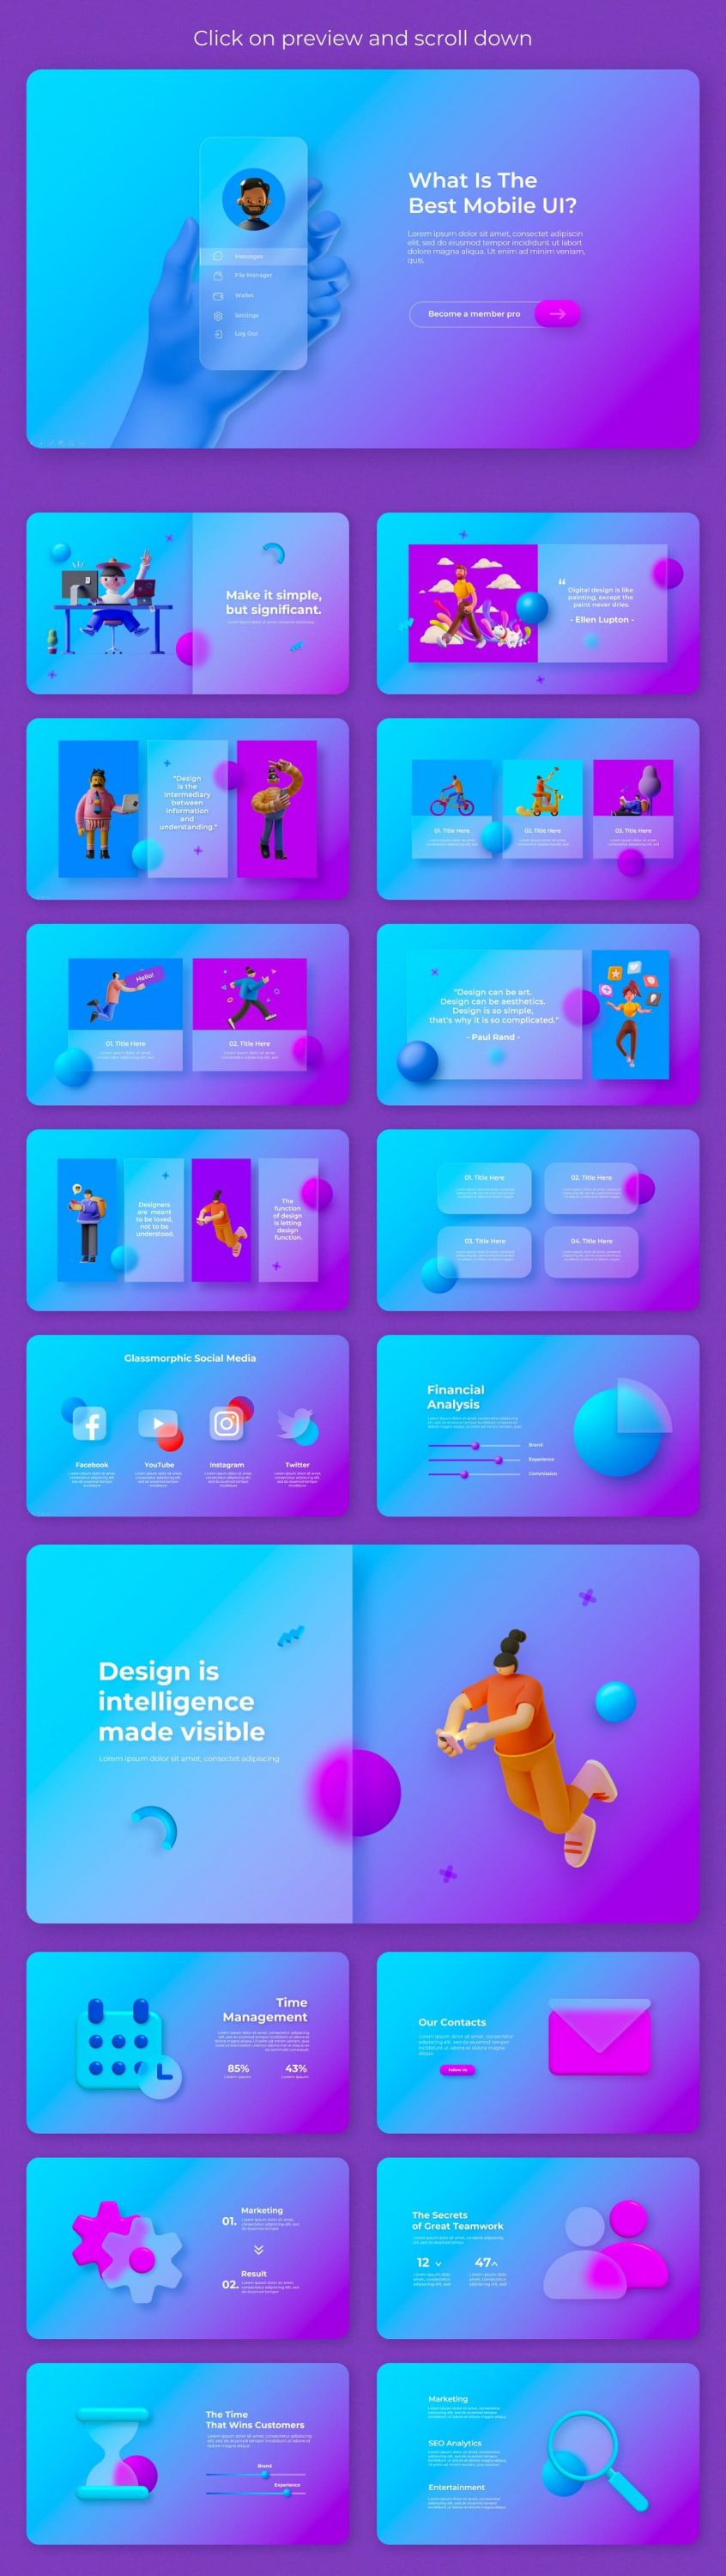 Preview slides with glassmorphism effect. Massive Animated PowerPoint Bundle.